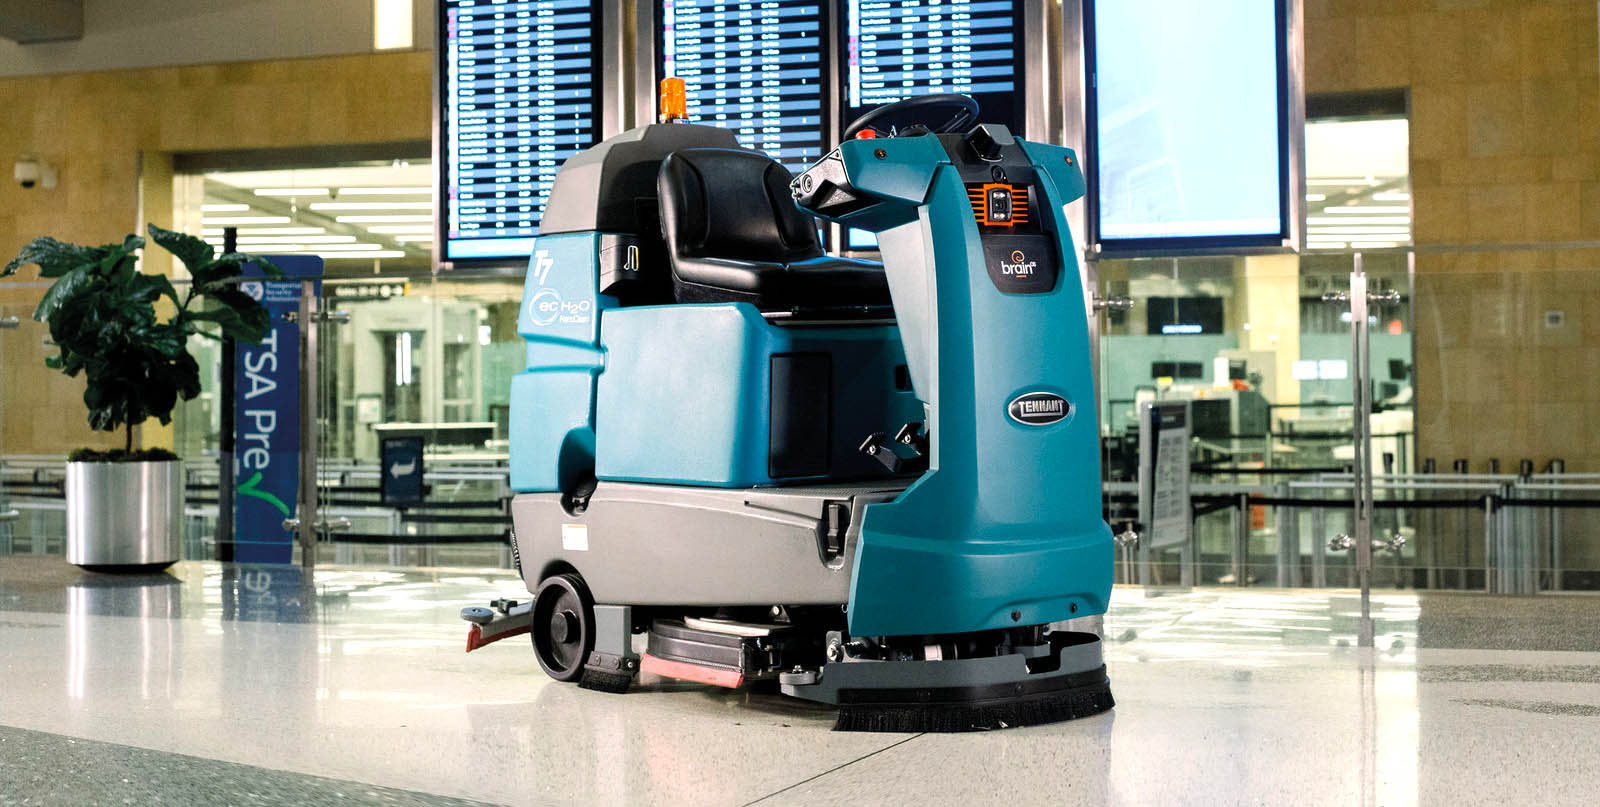 Automation robotic cleaning